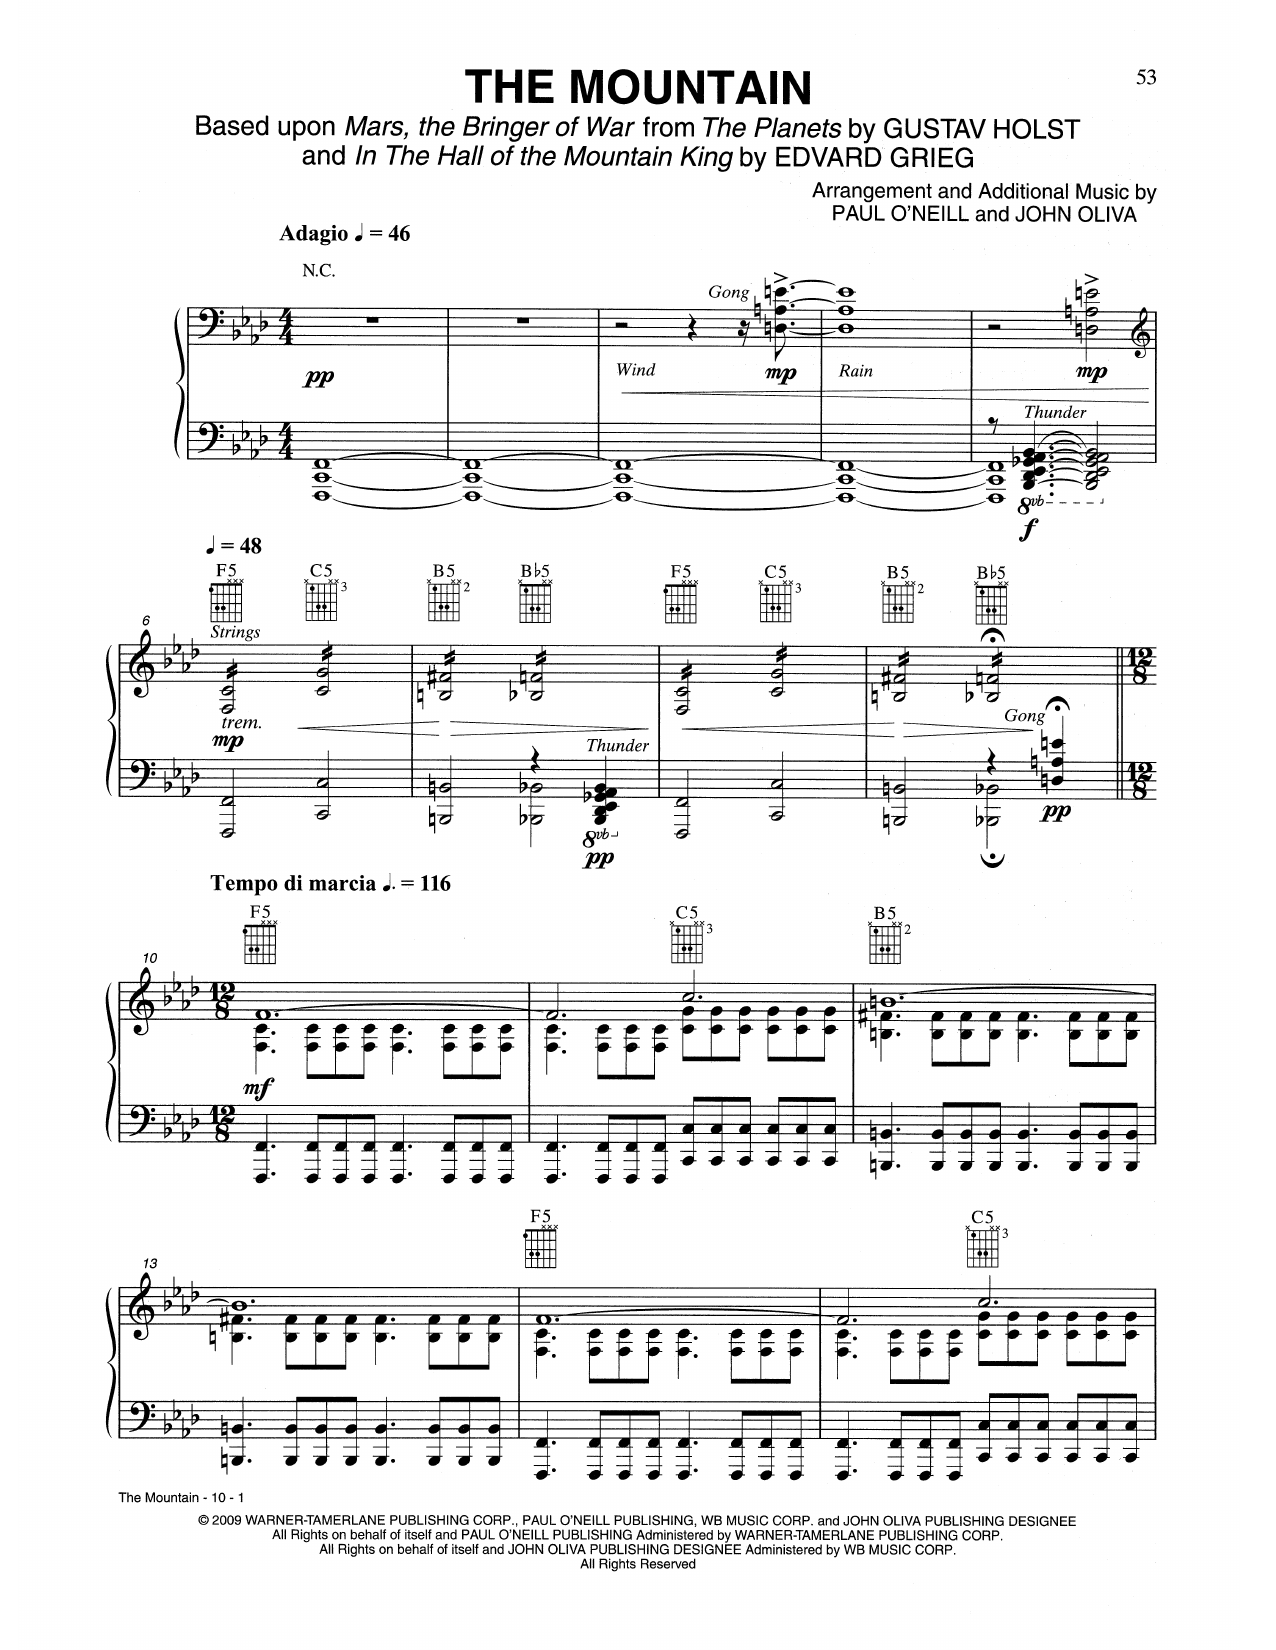 Download Trans-Siberian Orchestra The Mountain Sheet Music